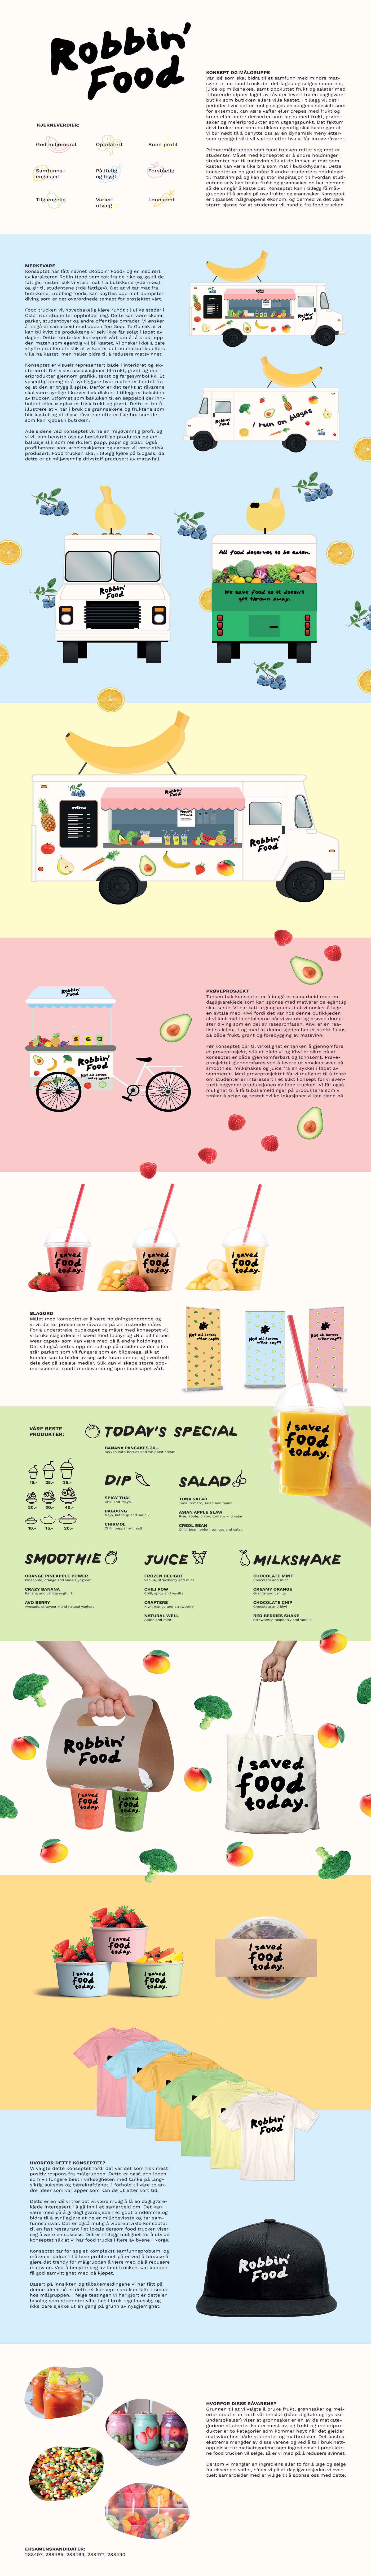 #graphicDesign #FOODWASTE #visualidentity  #societychange #FoodTruck #smoothie #juice 